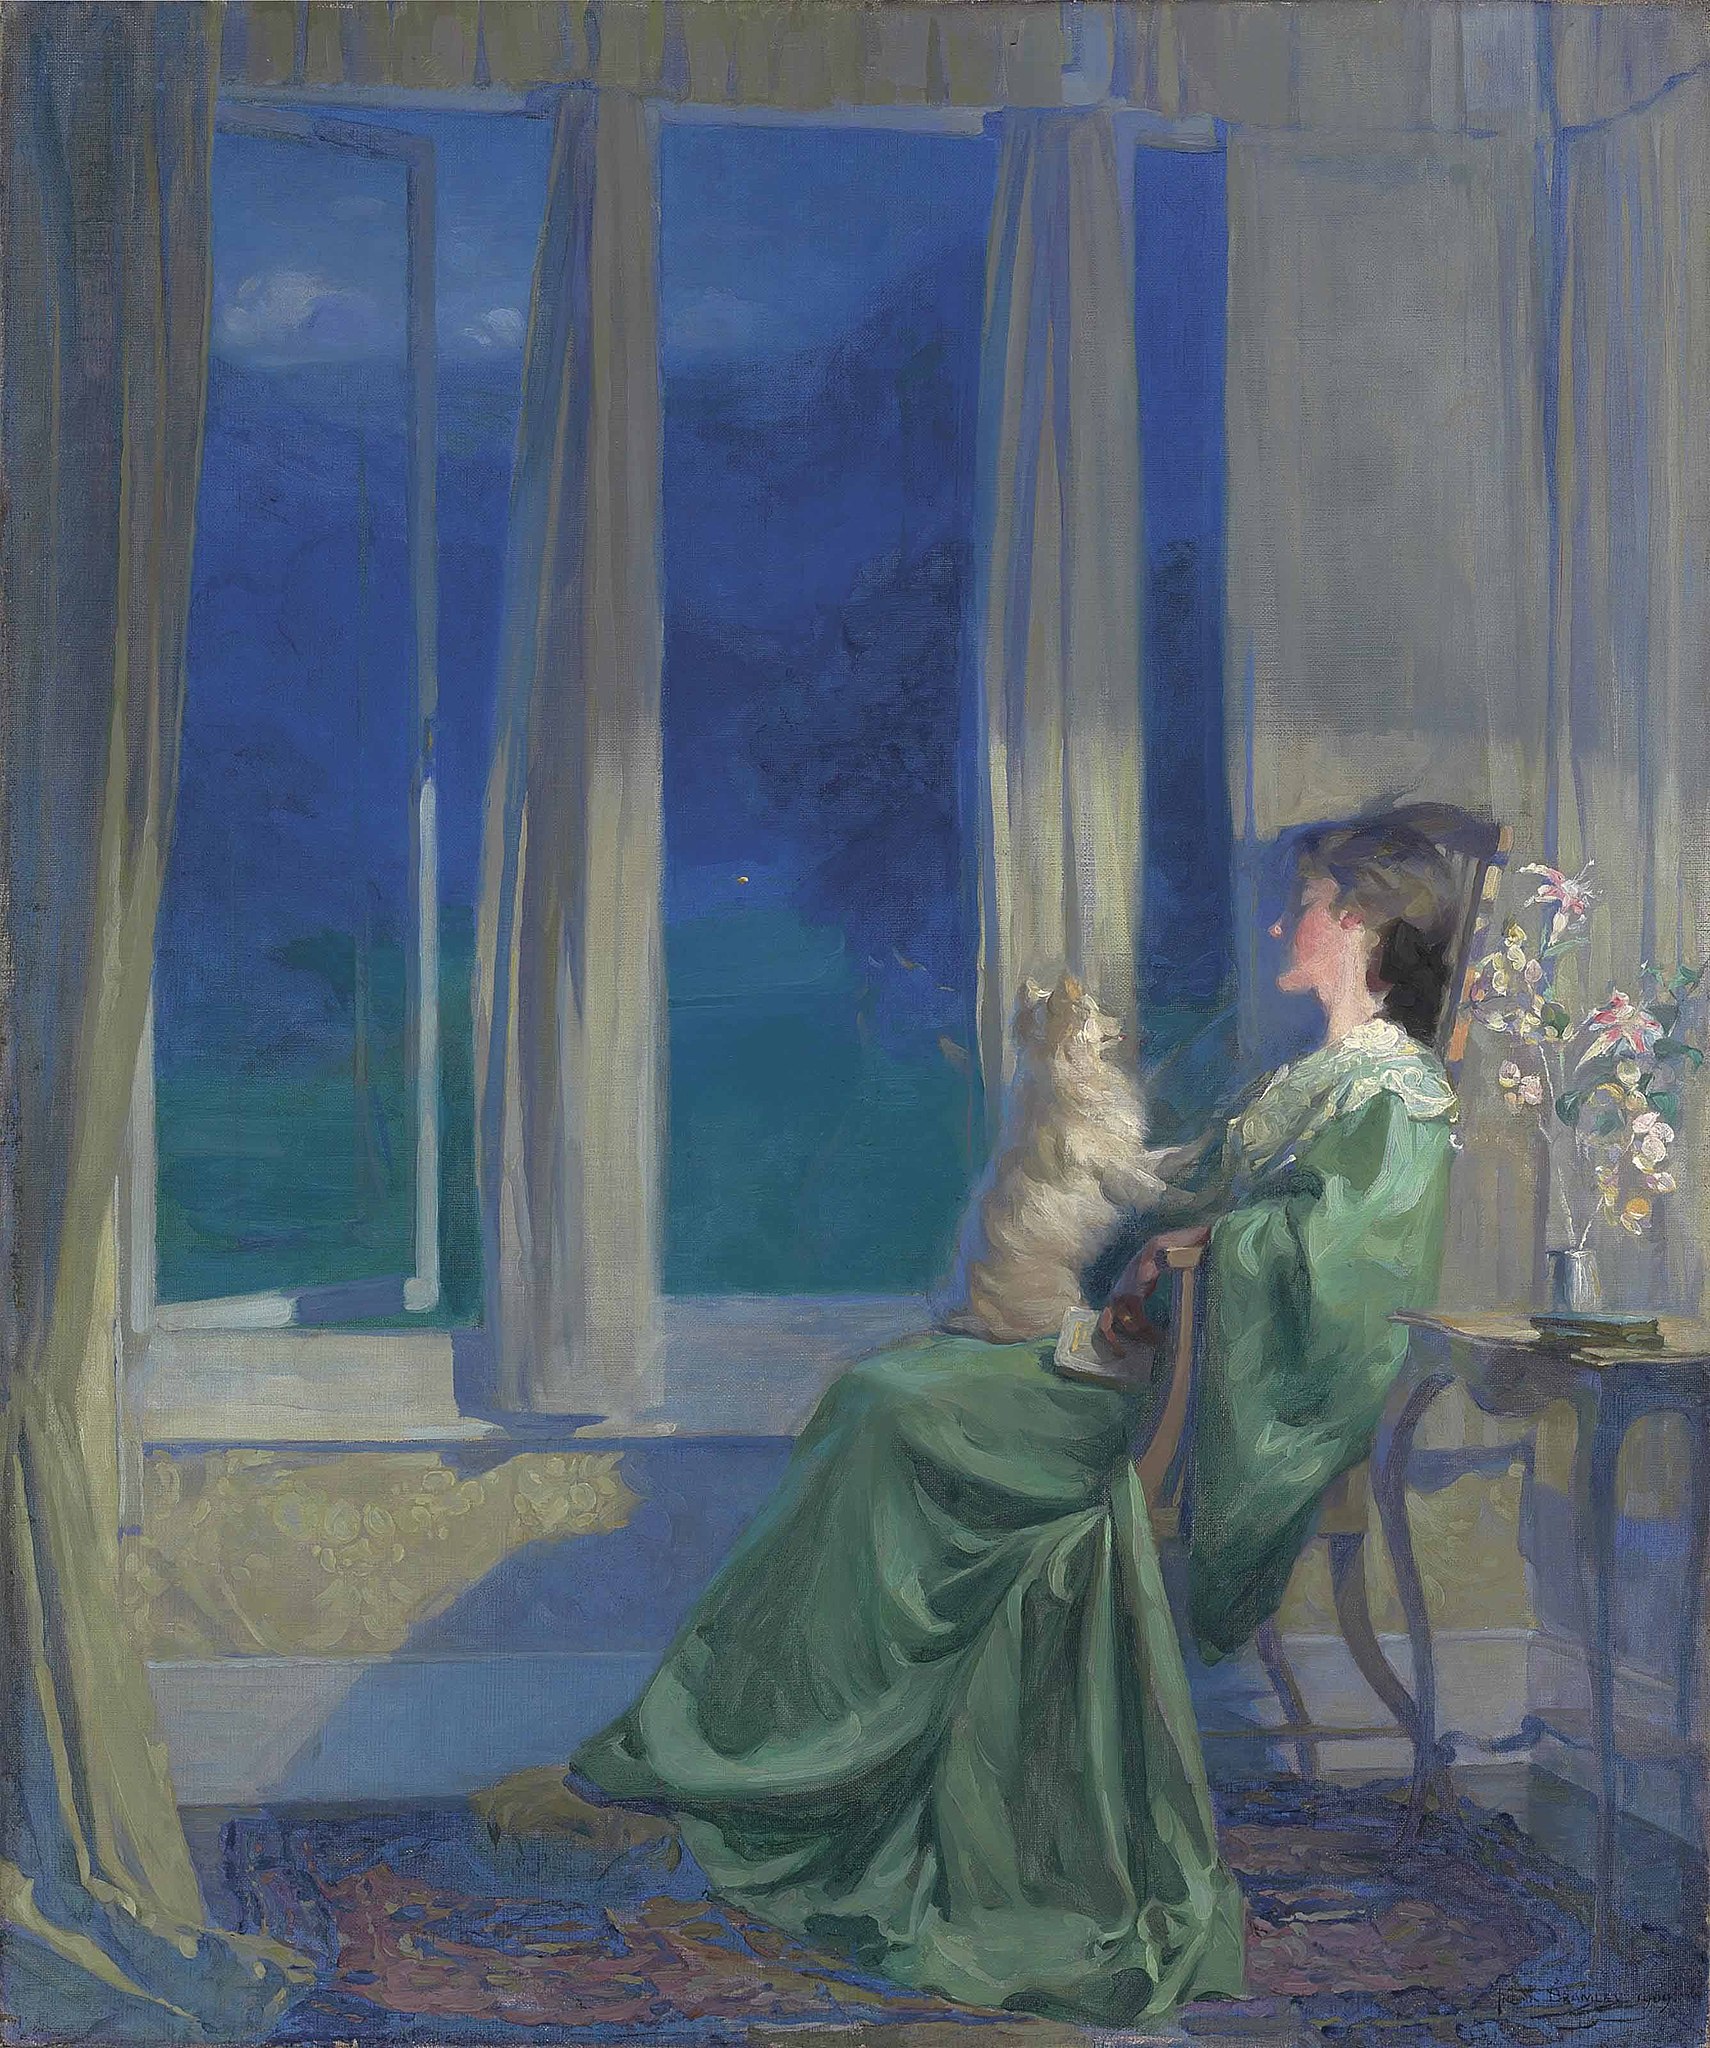 When the Blue Evening Slowly Falls by Frank Bramley - 1909 - 90.8 x 76.8 cm private collection